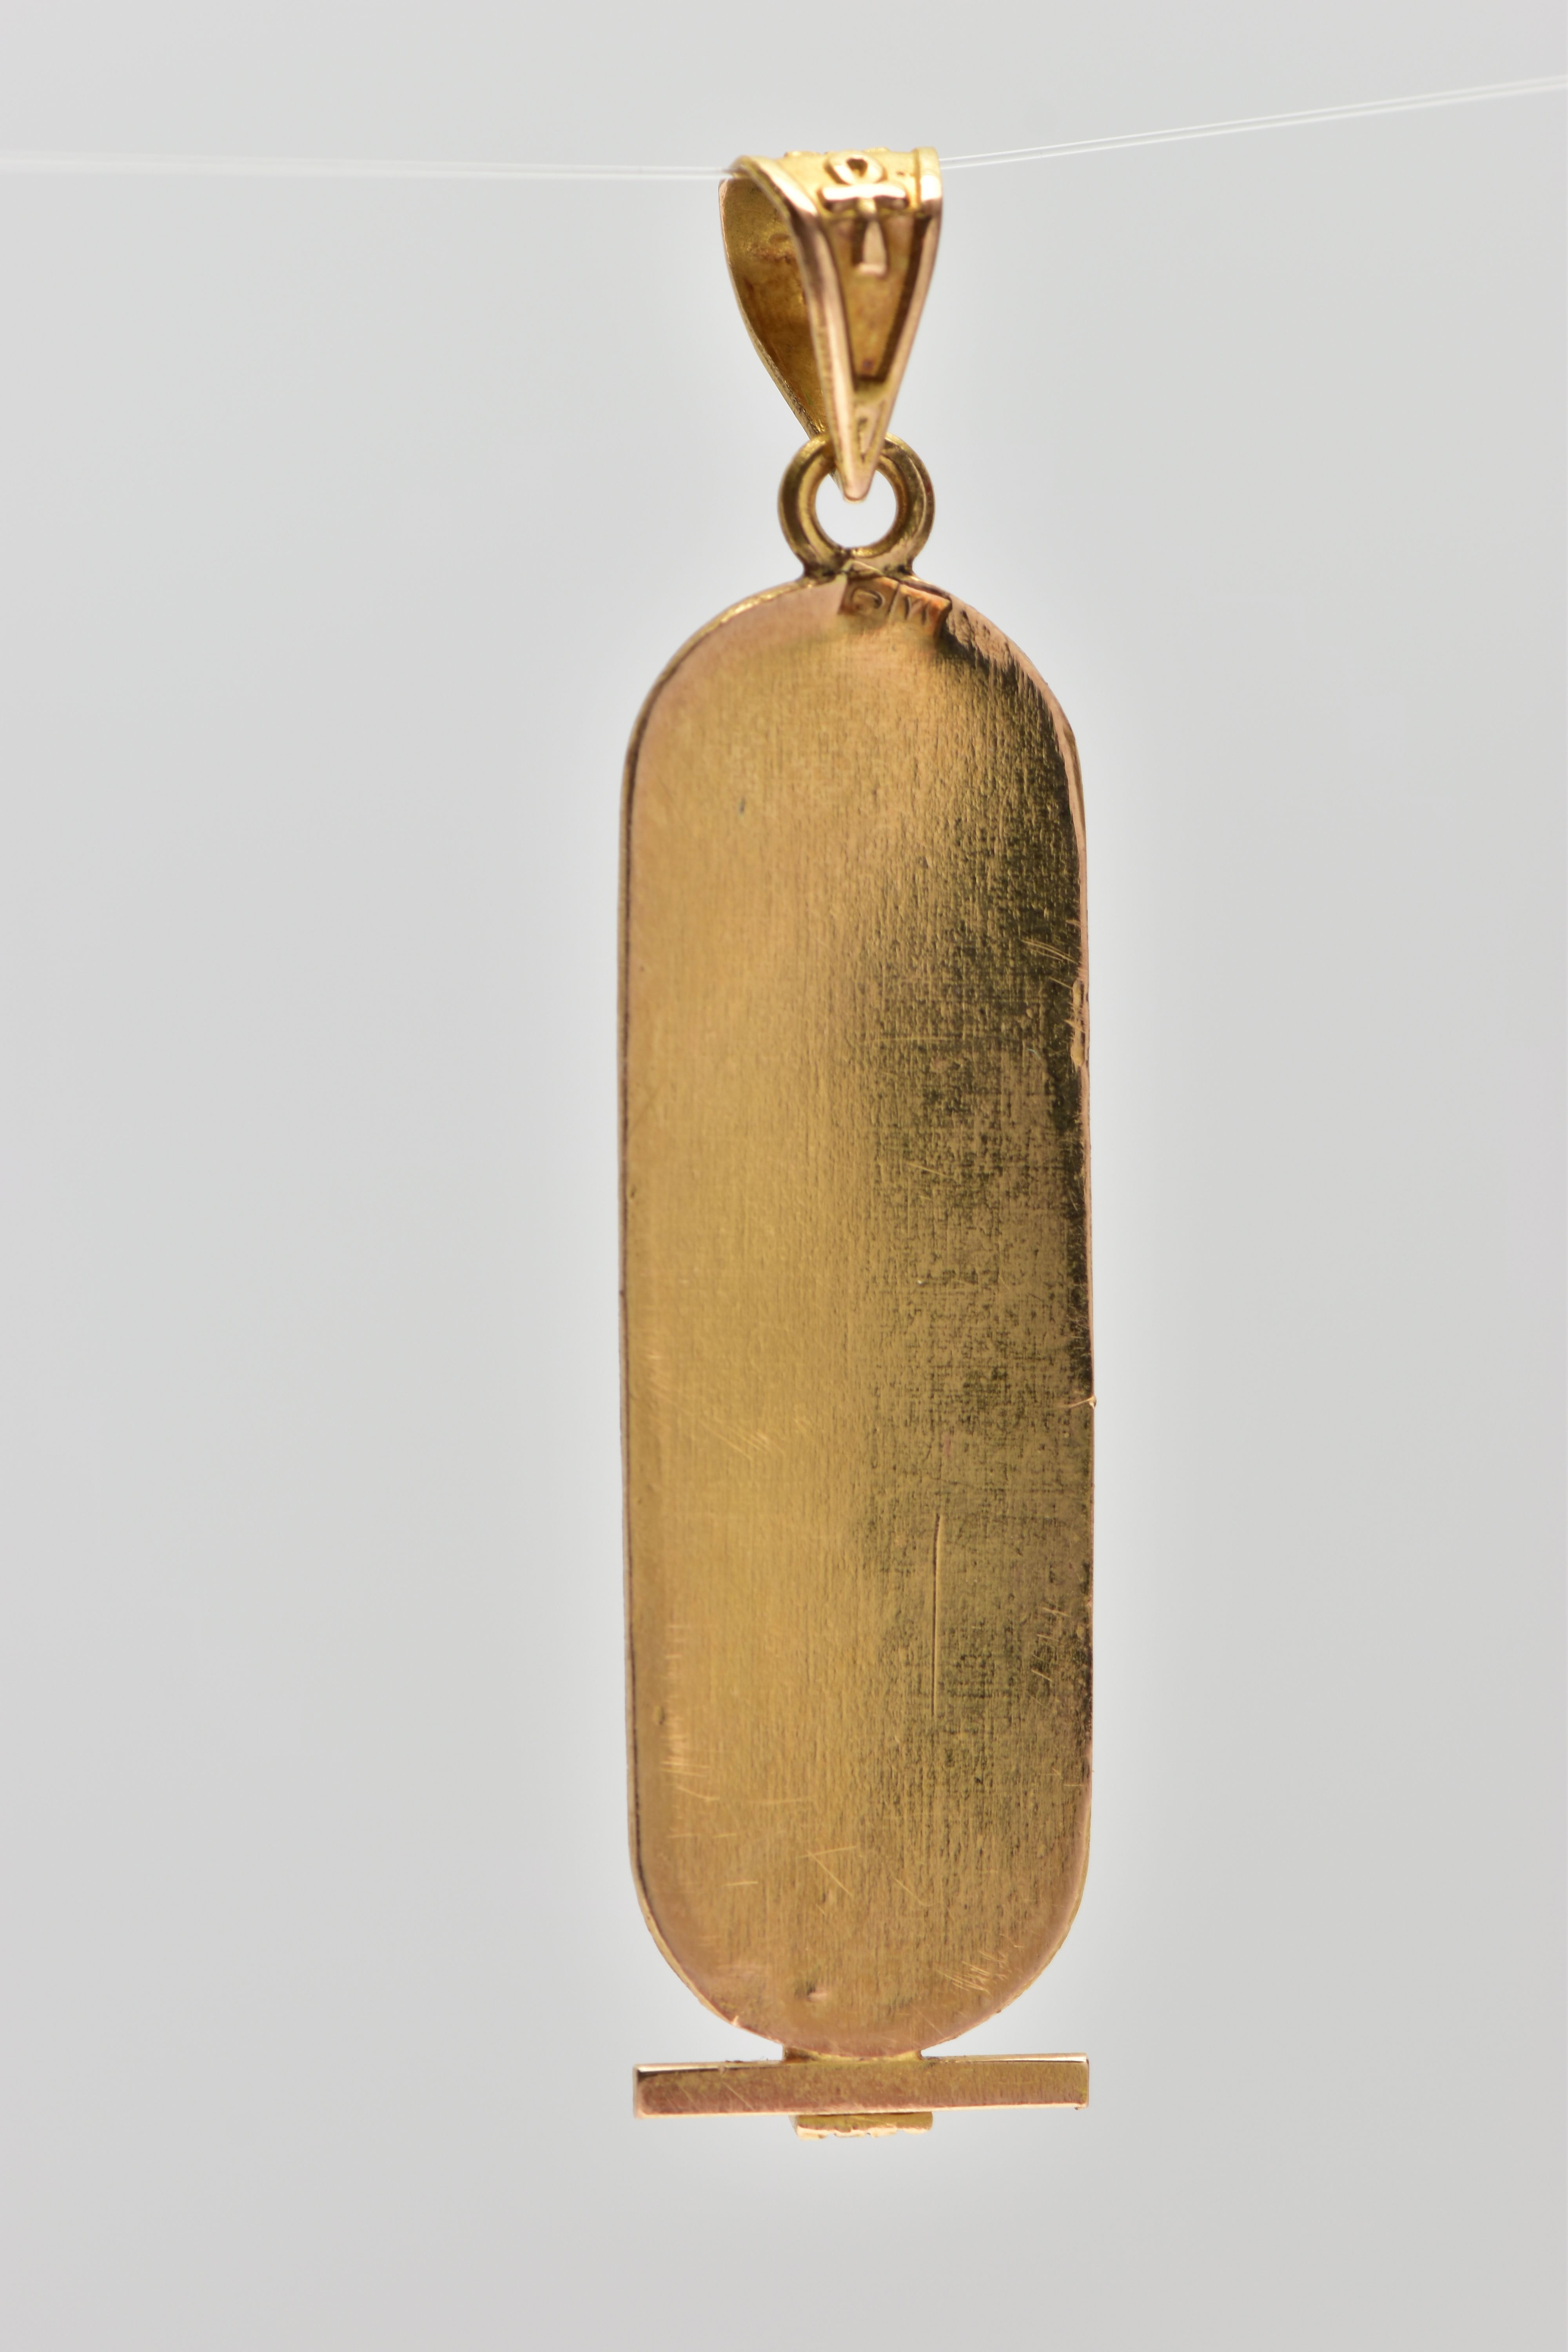 A YELLOW METAL EGYPTIAN CARTOUCHE PENDANT, of an oval outline displaying hieroglyphics, fitted - Image 2 of 2